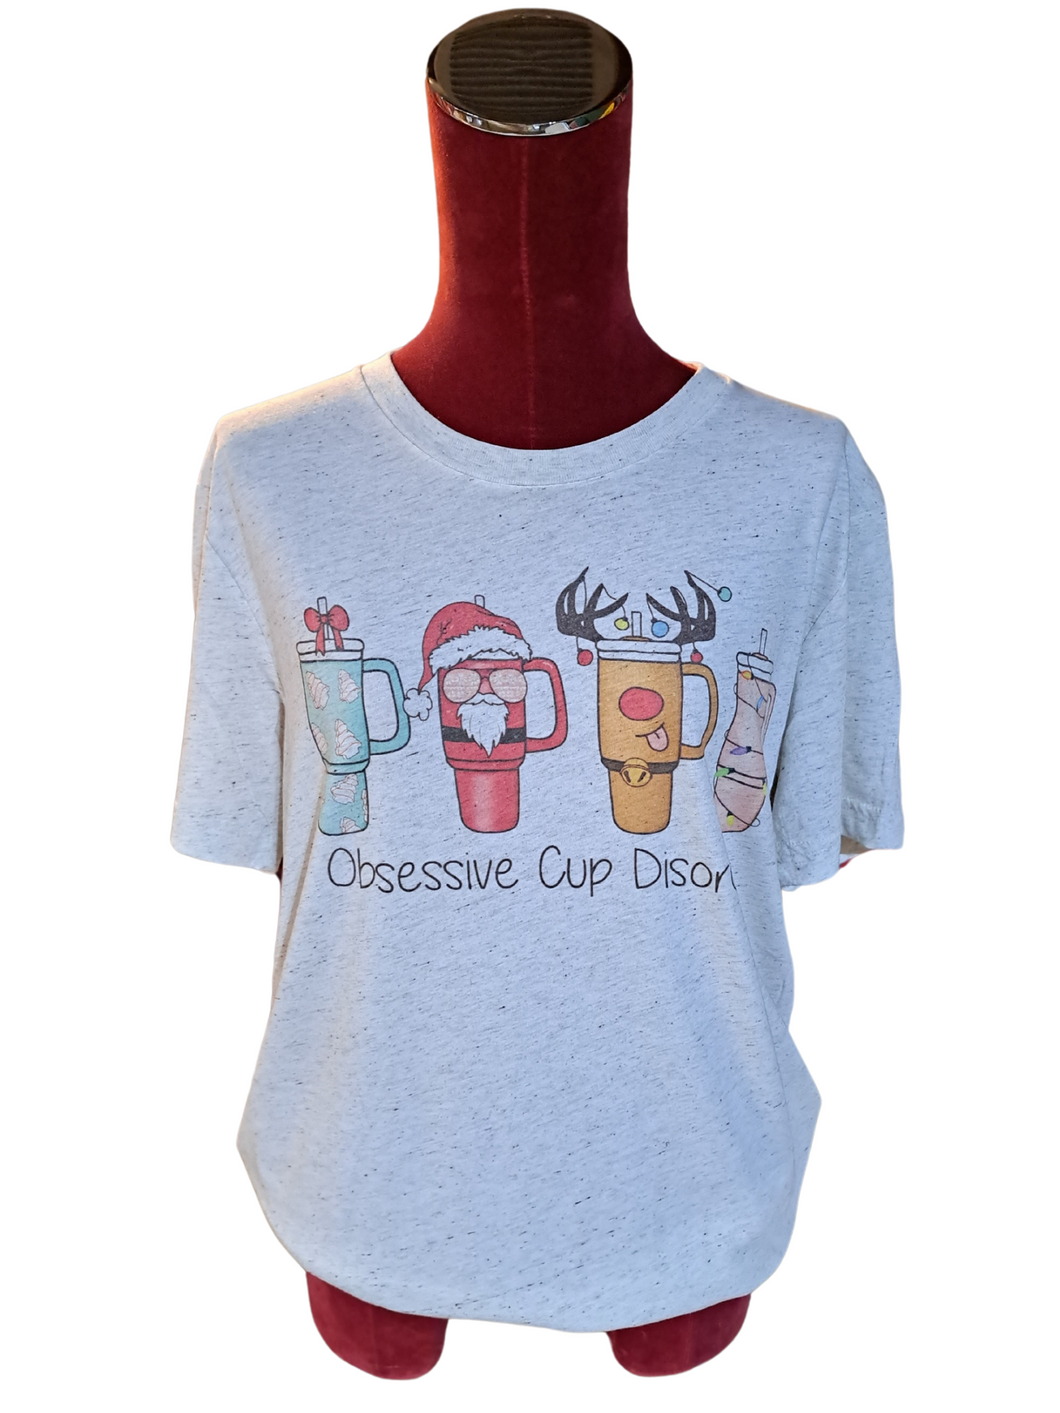 Obsessive Cup Disorder Unisex Shirt